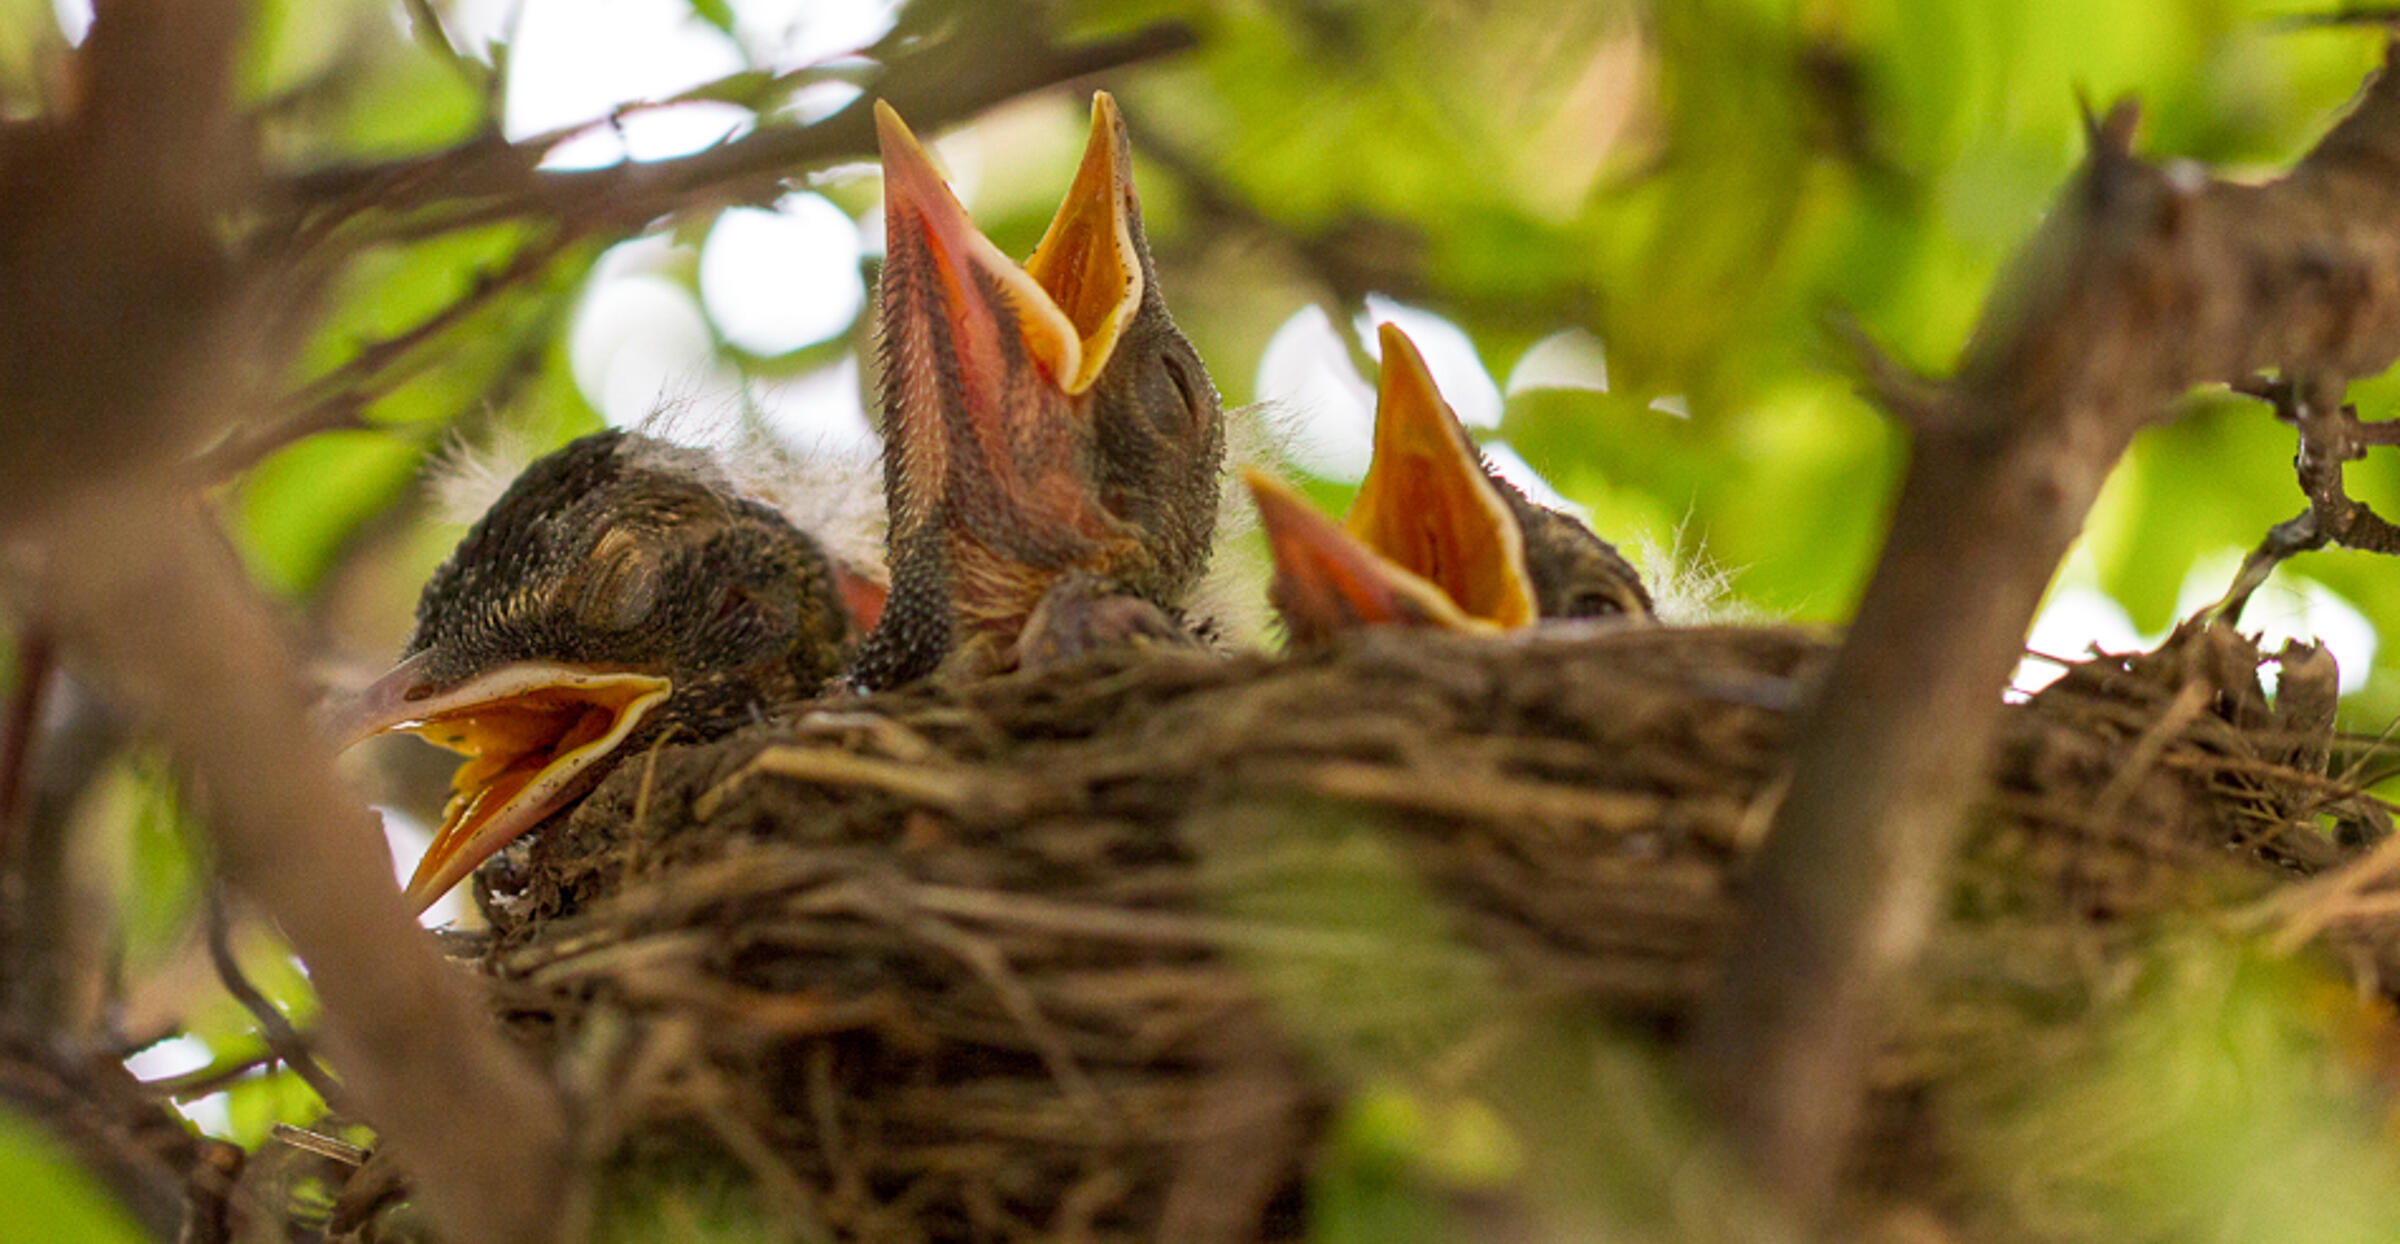 Three sparsely-feathered American Robin chicks in a nest, poking their heads out and opening their beaks.